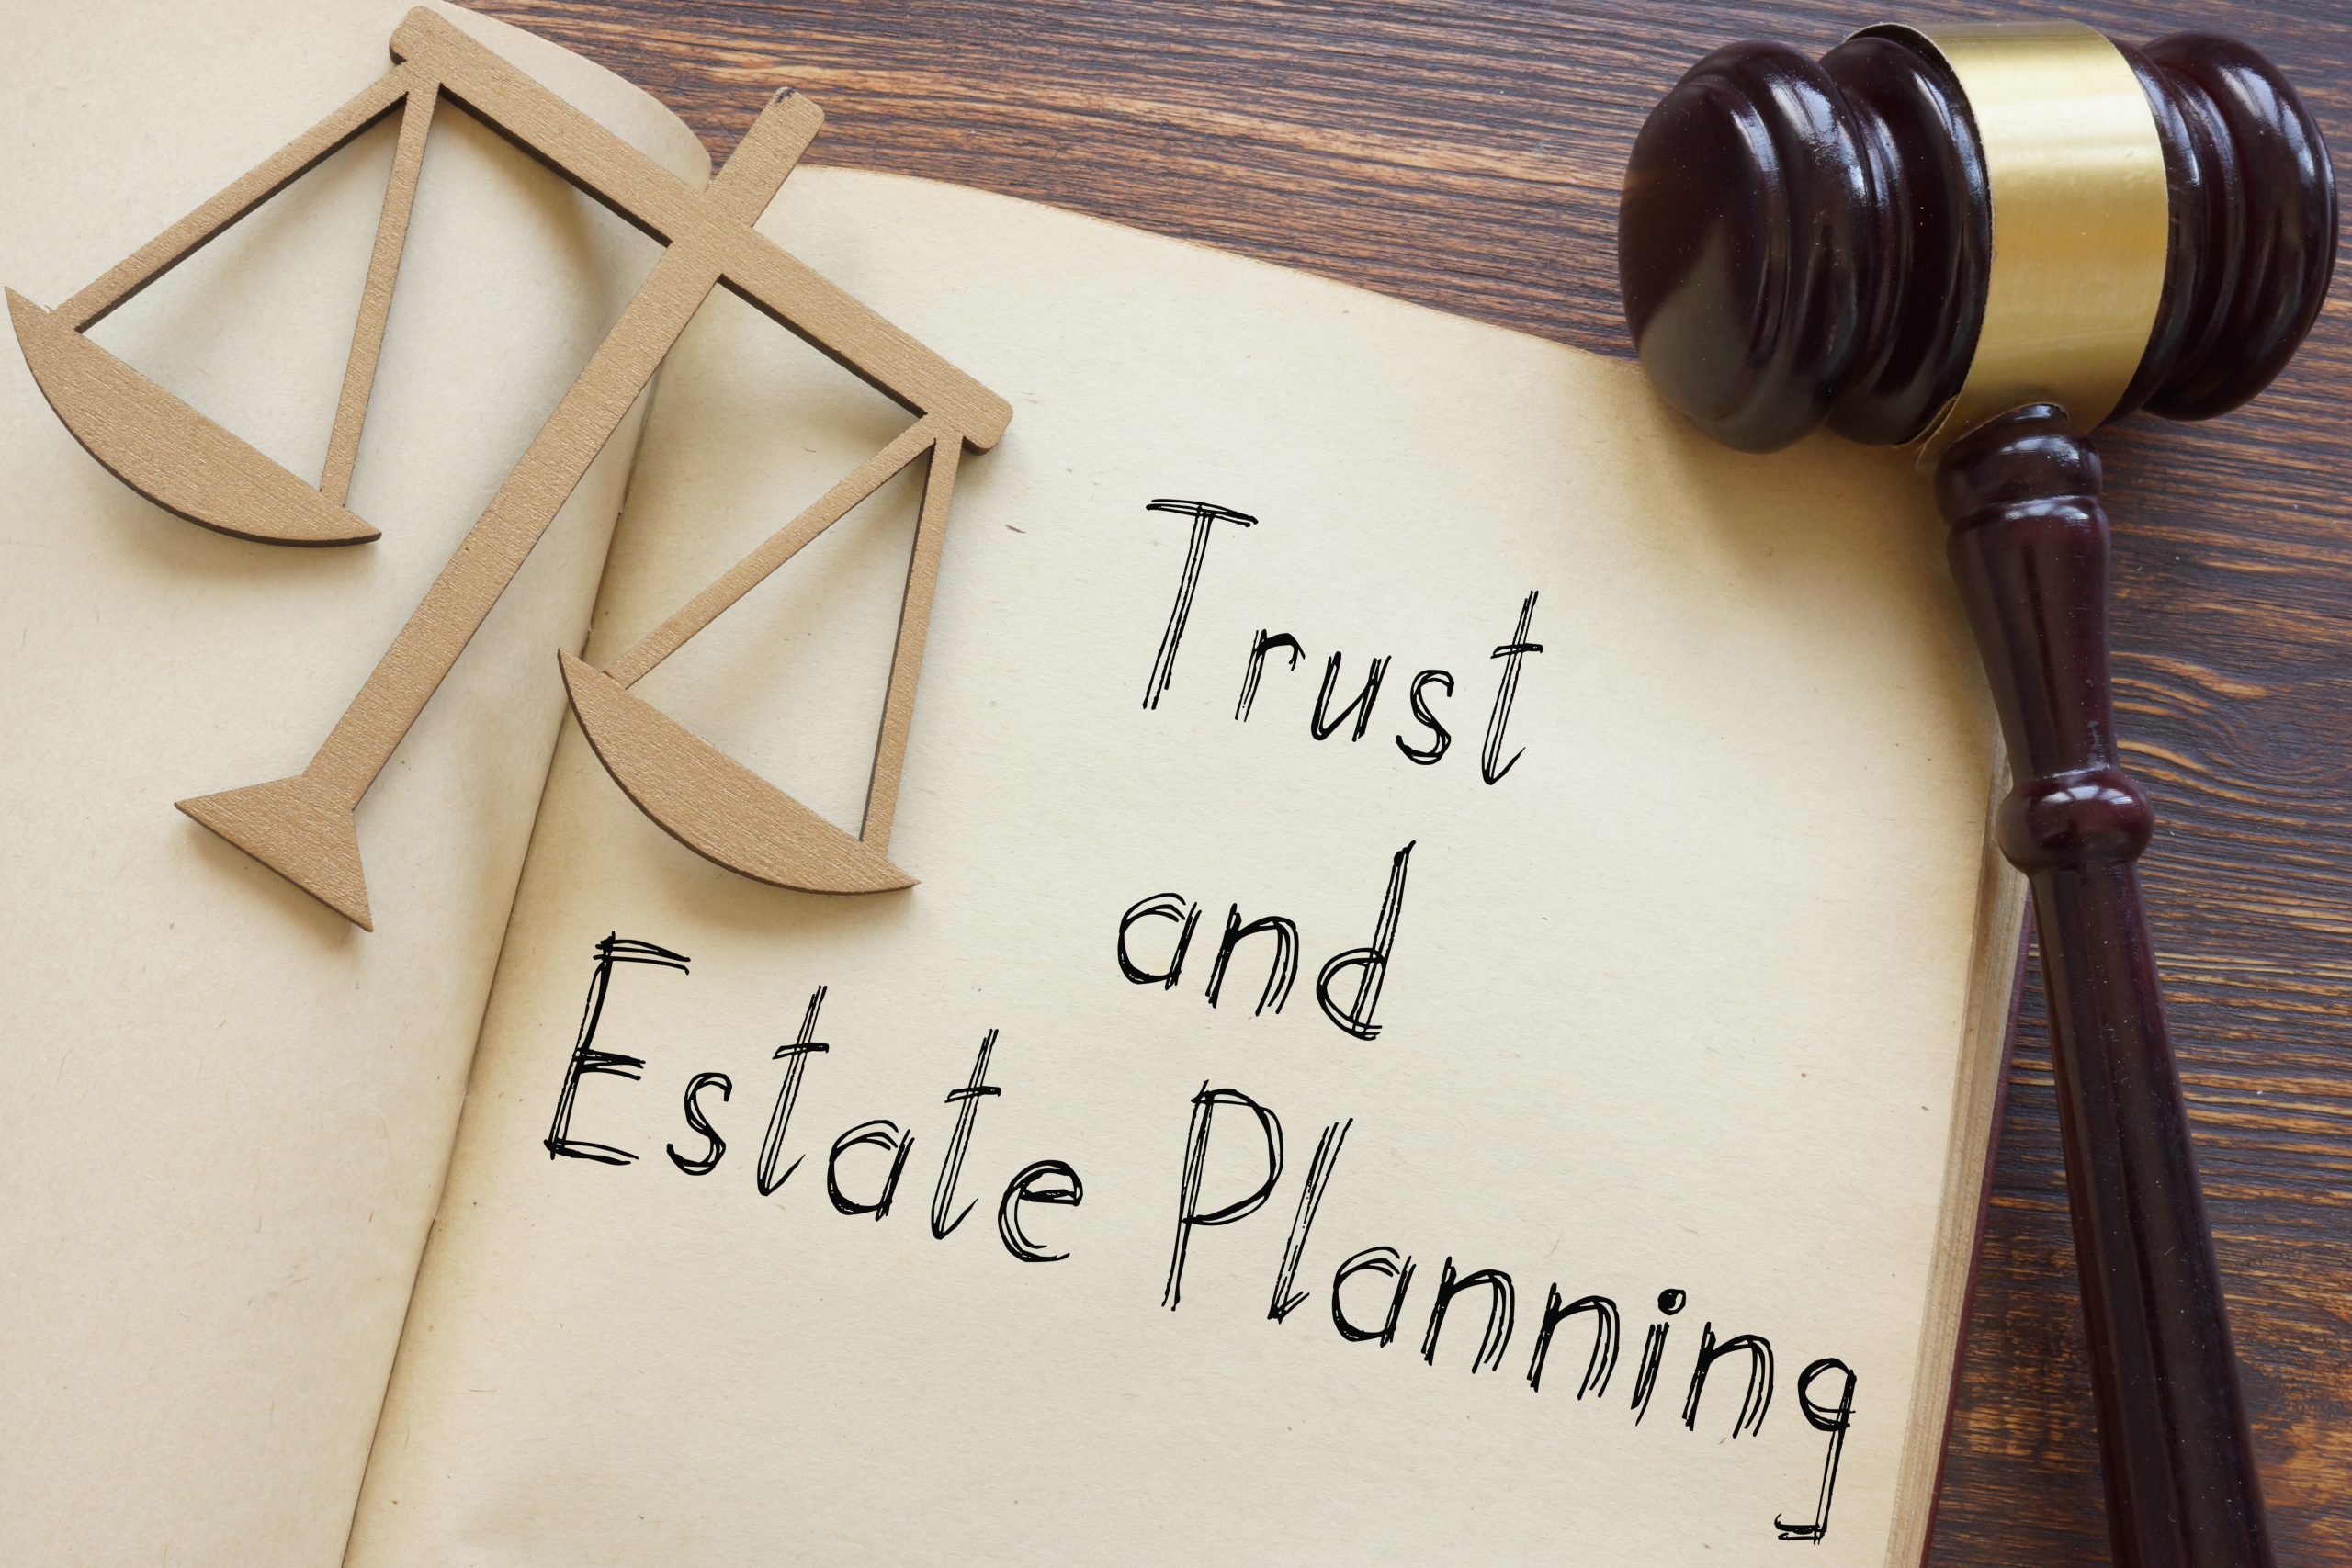 trust and estate planning Woods Law